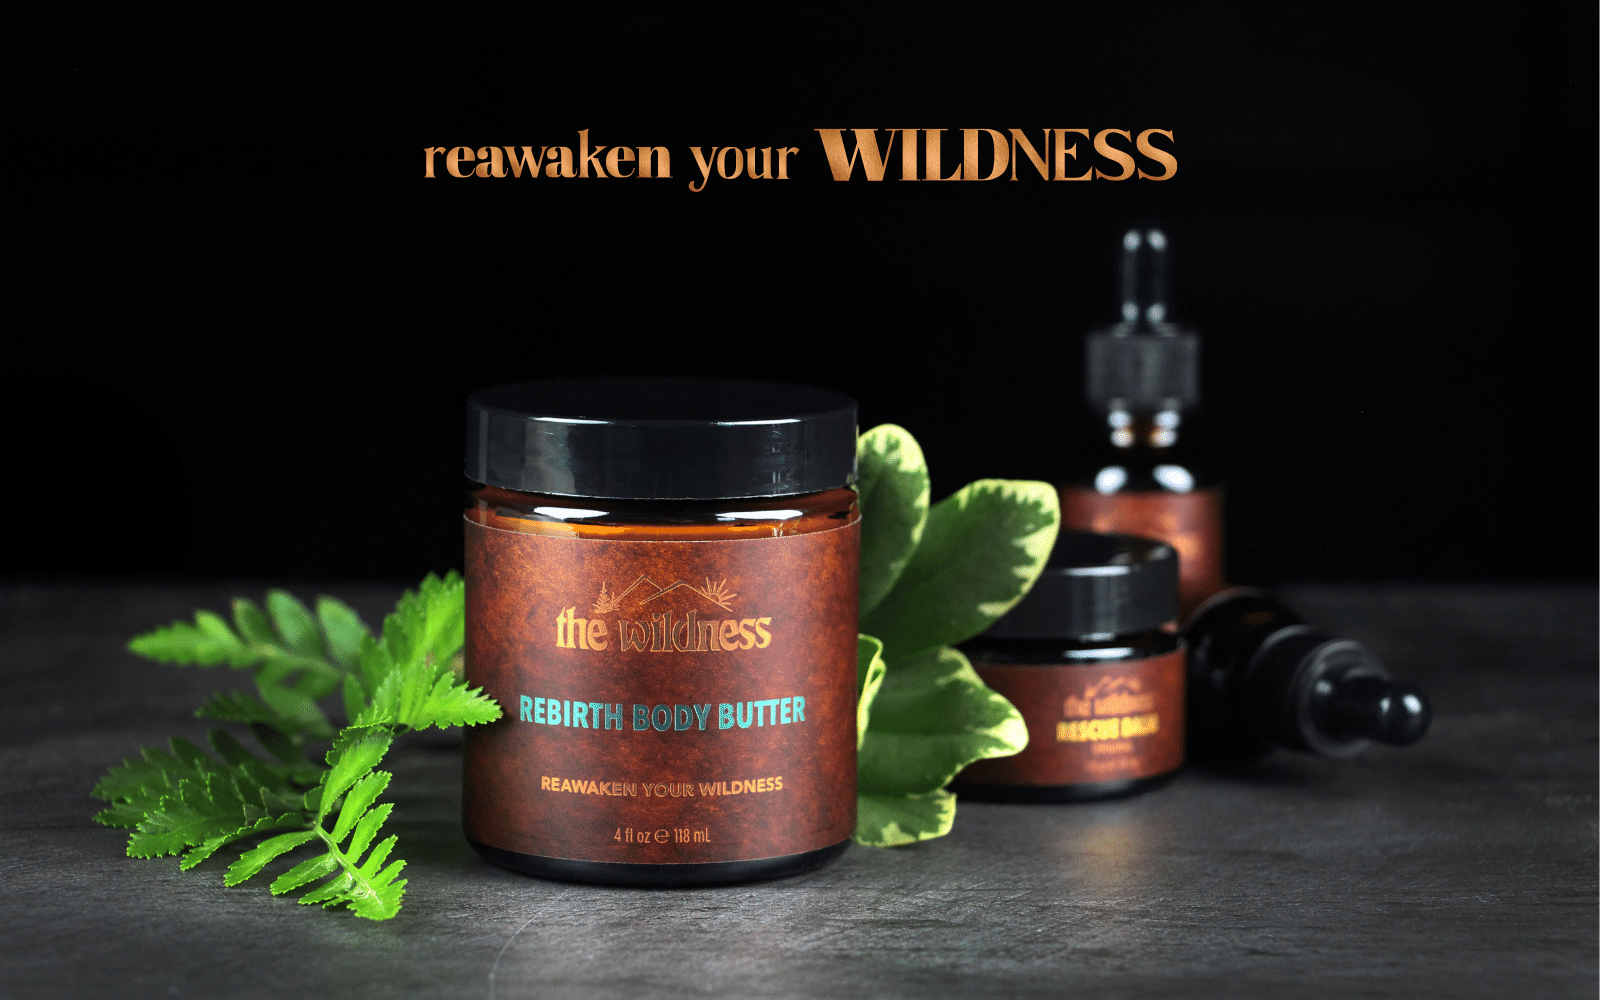 Reawaken your wildness with the wildness skincare rebirth body butter rescue balm and serum with plants